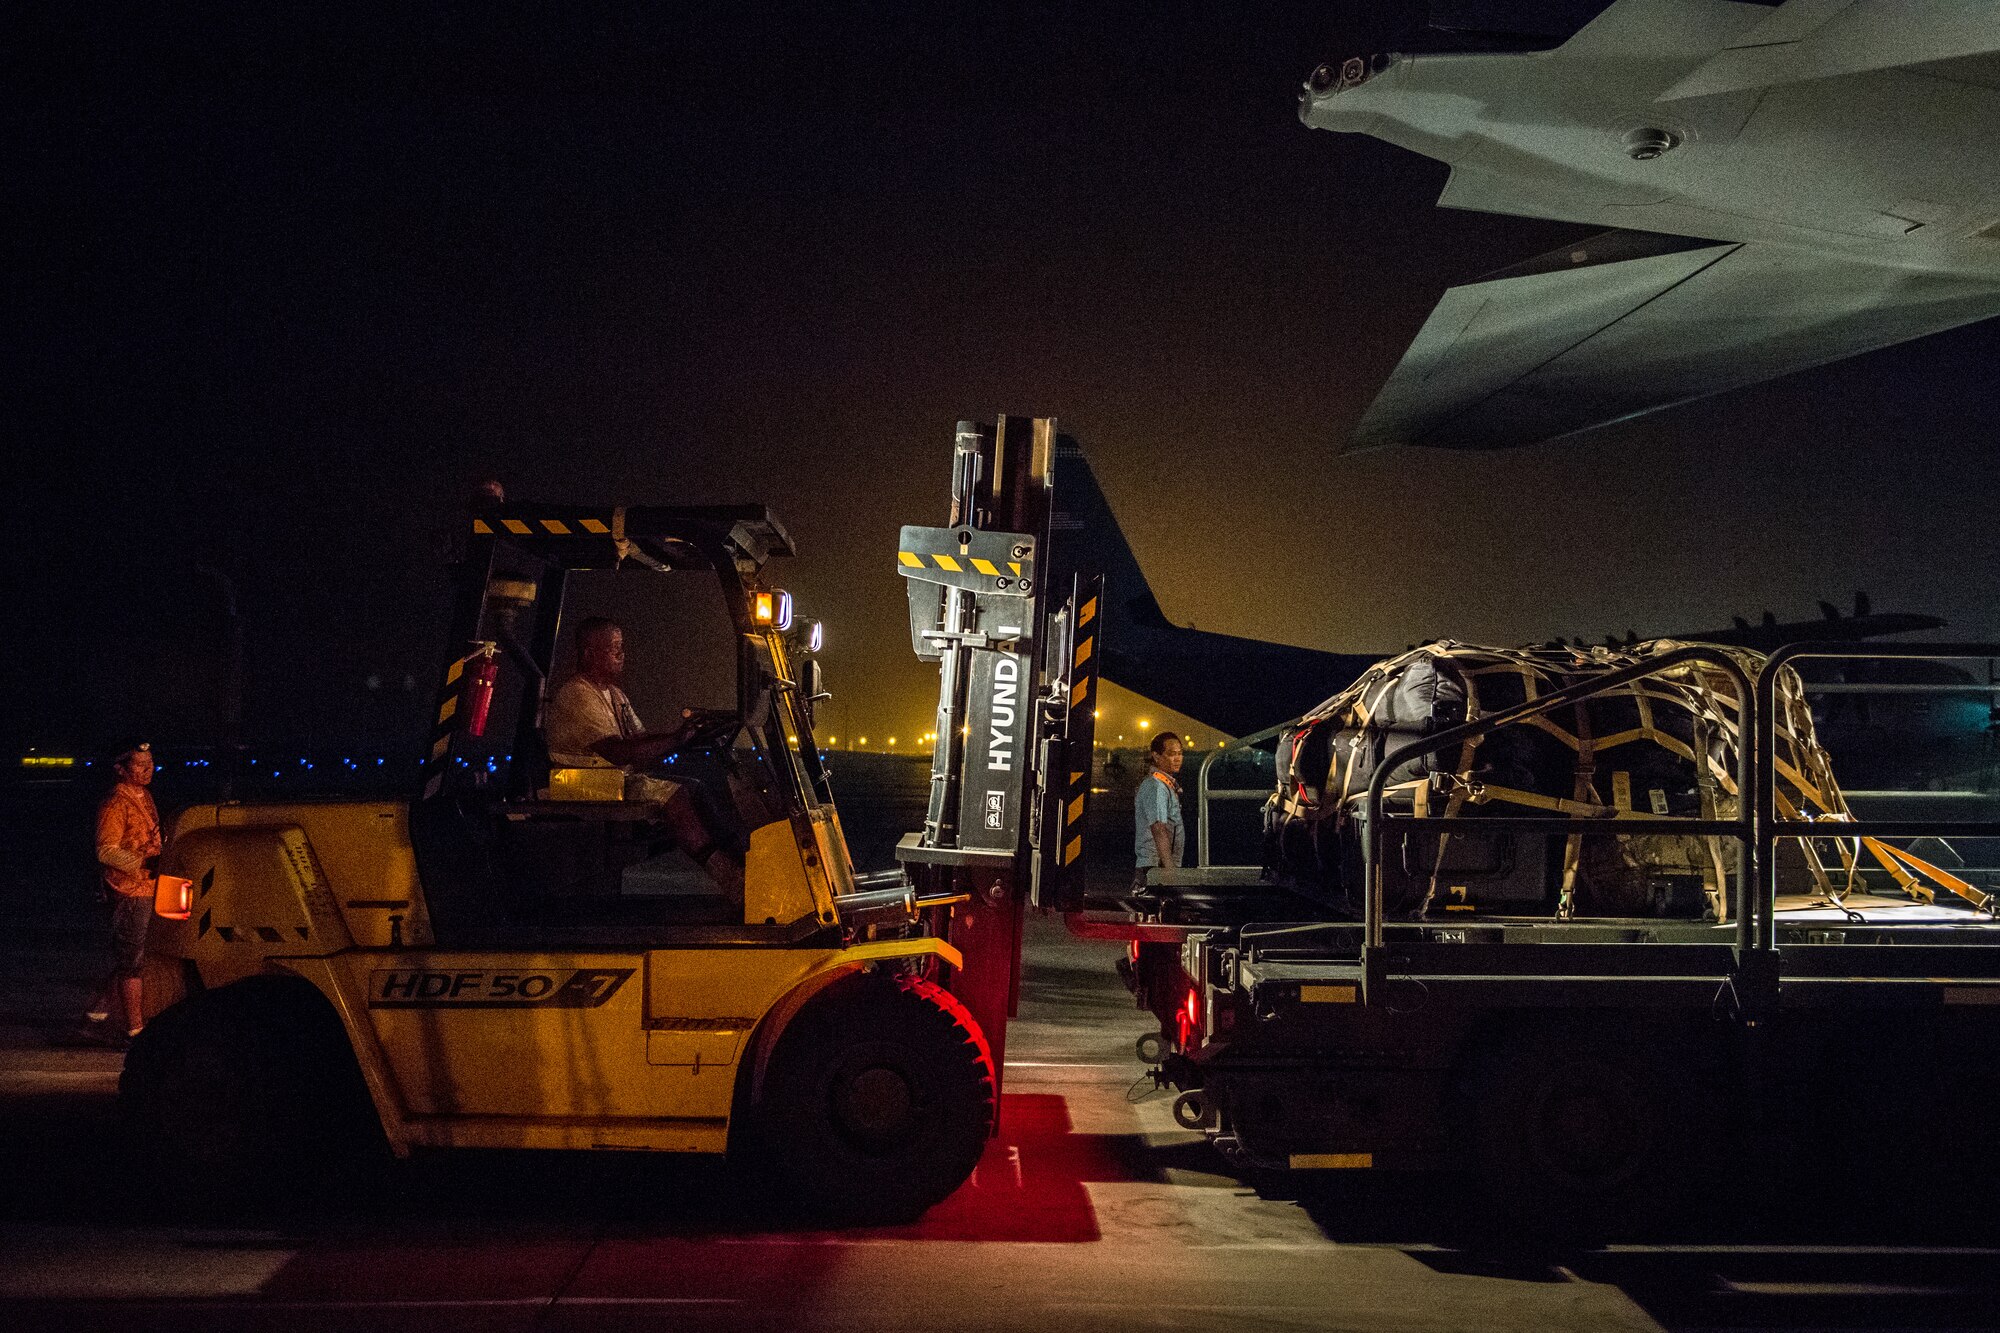 An air operations member loads luggage onto a C-130J Super Hercules with the help of 75th Expeditionary Airlift Squadron Airmen at Camp Lemonnier, Djibouti, June 5, 2019. The 75th EAS provides support in medical evacuations, disaster relief, humanitarian and airdrop operations. (U.S. Air Force photo by Staff Sgt. Devin Boyer)